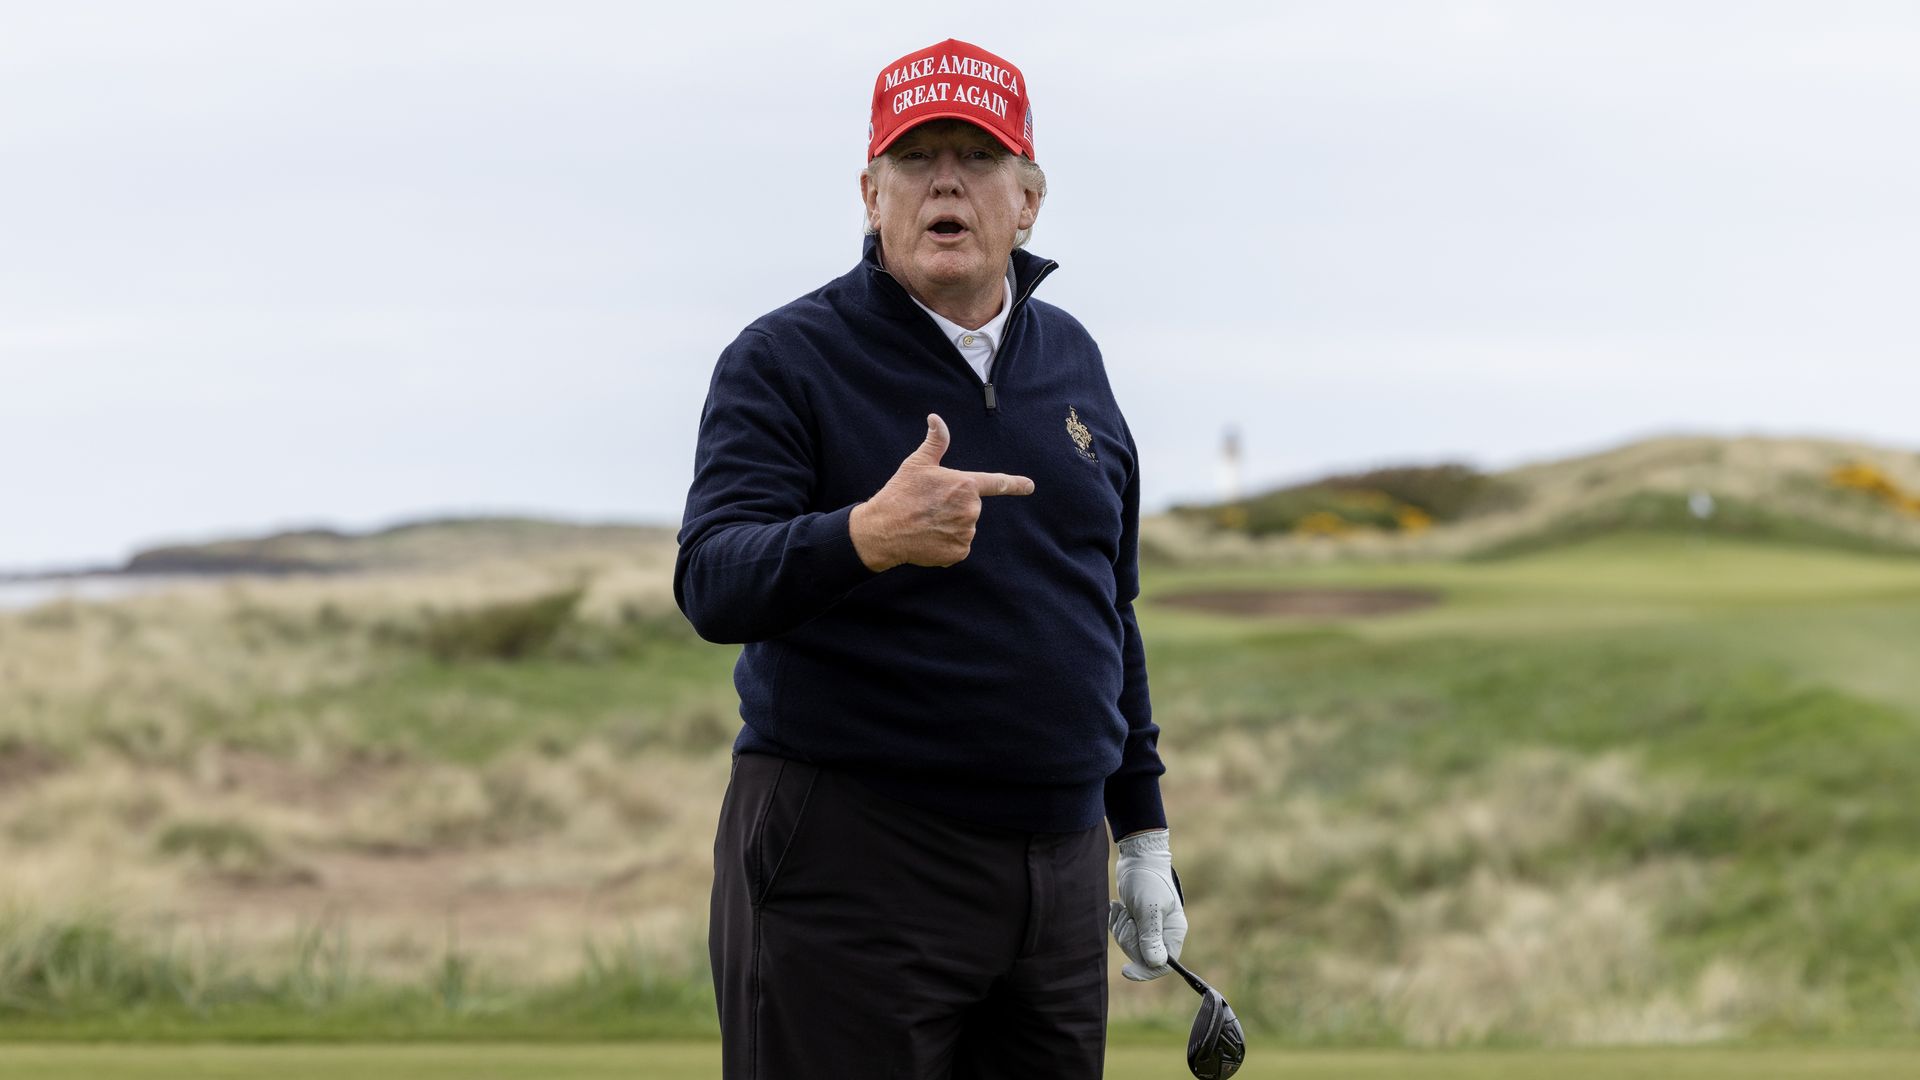 Former U.S. President Donald Trump gestures during a round of golf at his Turnberry course on May 2, 2023 in Turnberry, Scotland. 